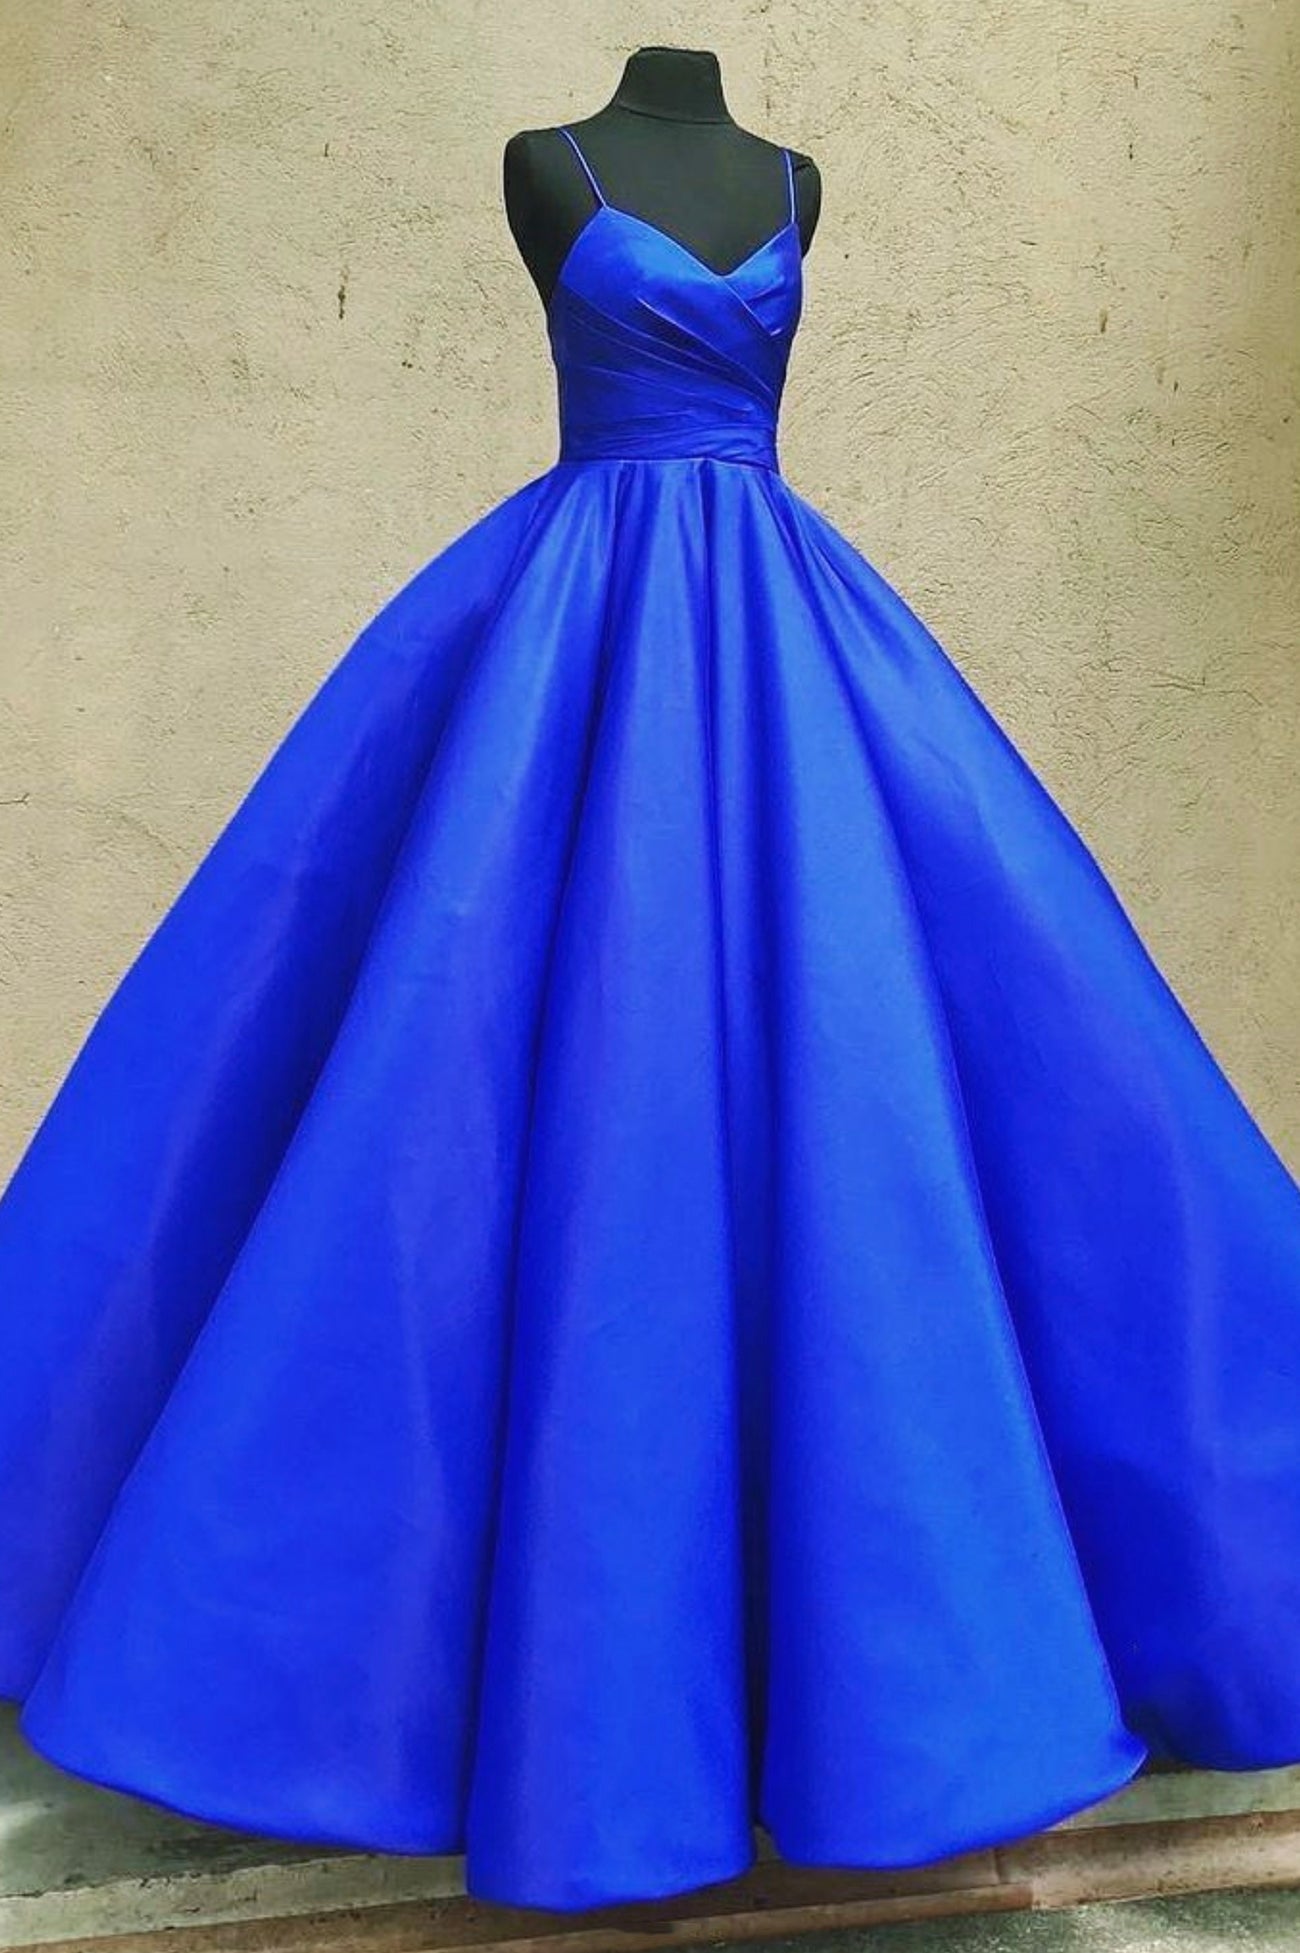 Bridesmaid Dress Long, Blue Spaghetti Satin Long Formal Dress, A-Line Evening Party Gown